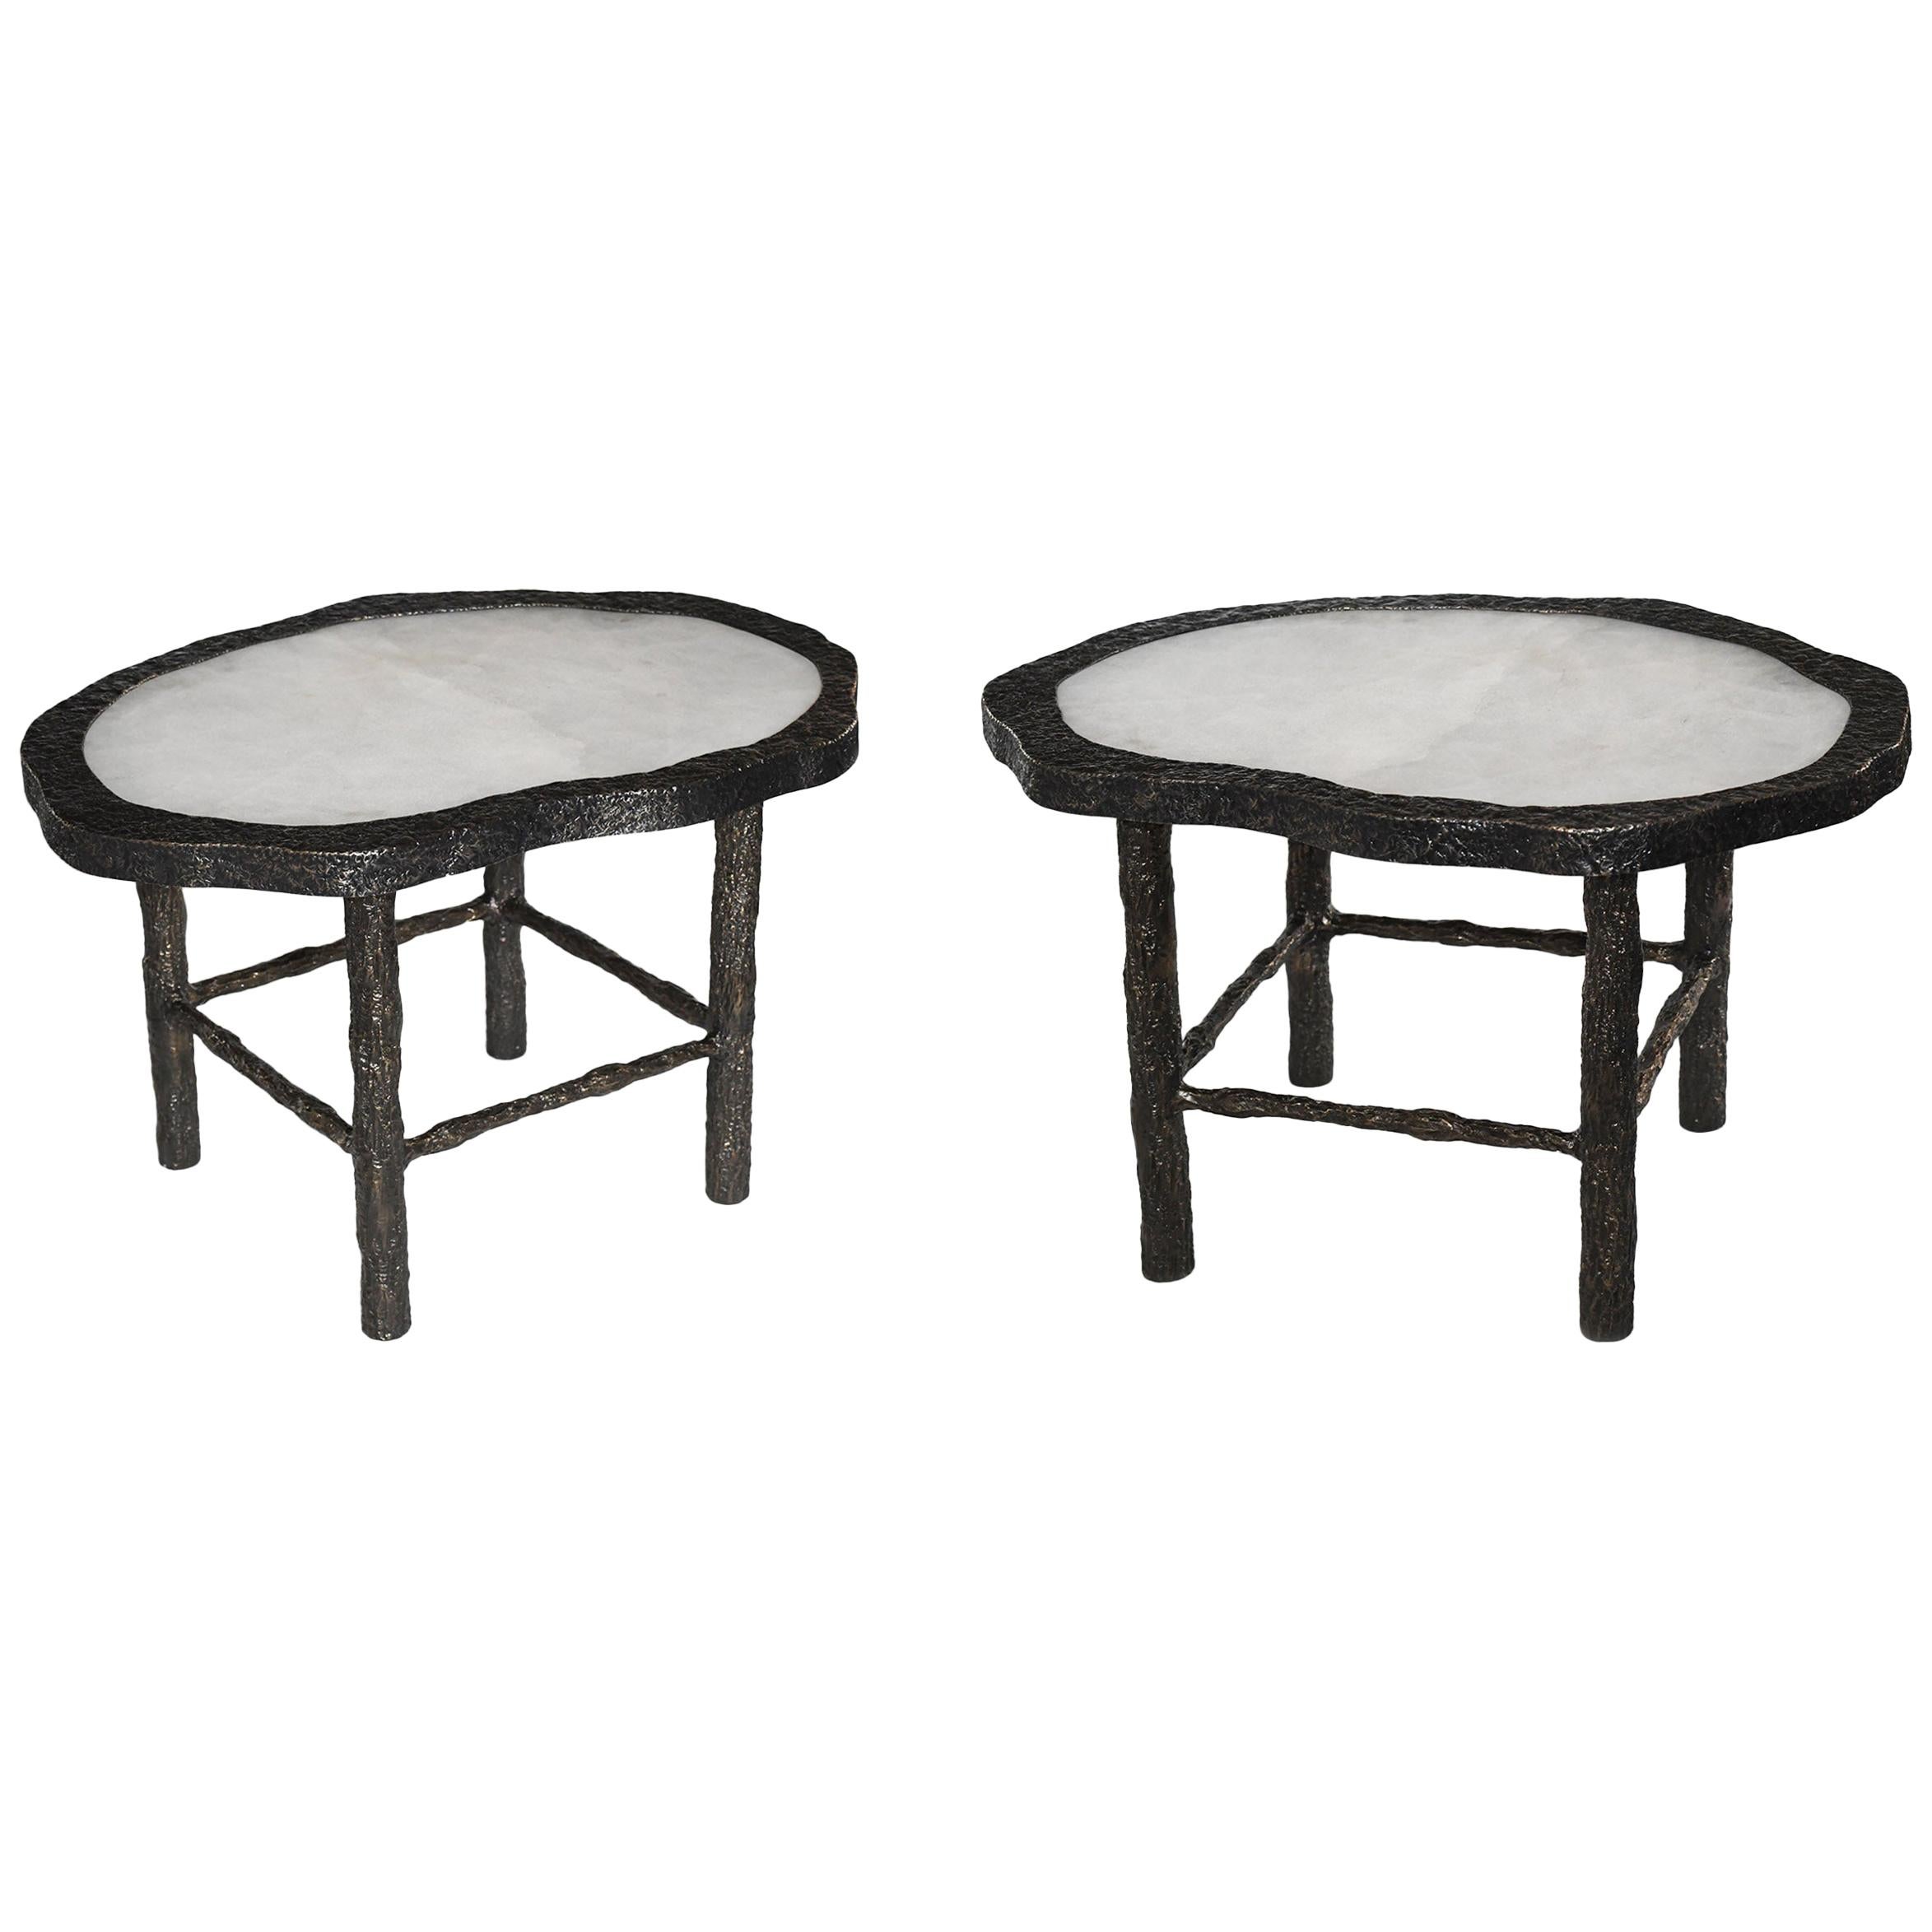 Pair of Two Rock Crystal Quartz Cocktail Tables by Phoenix